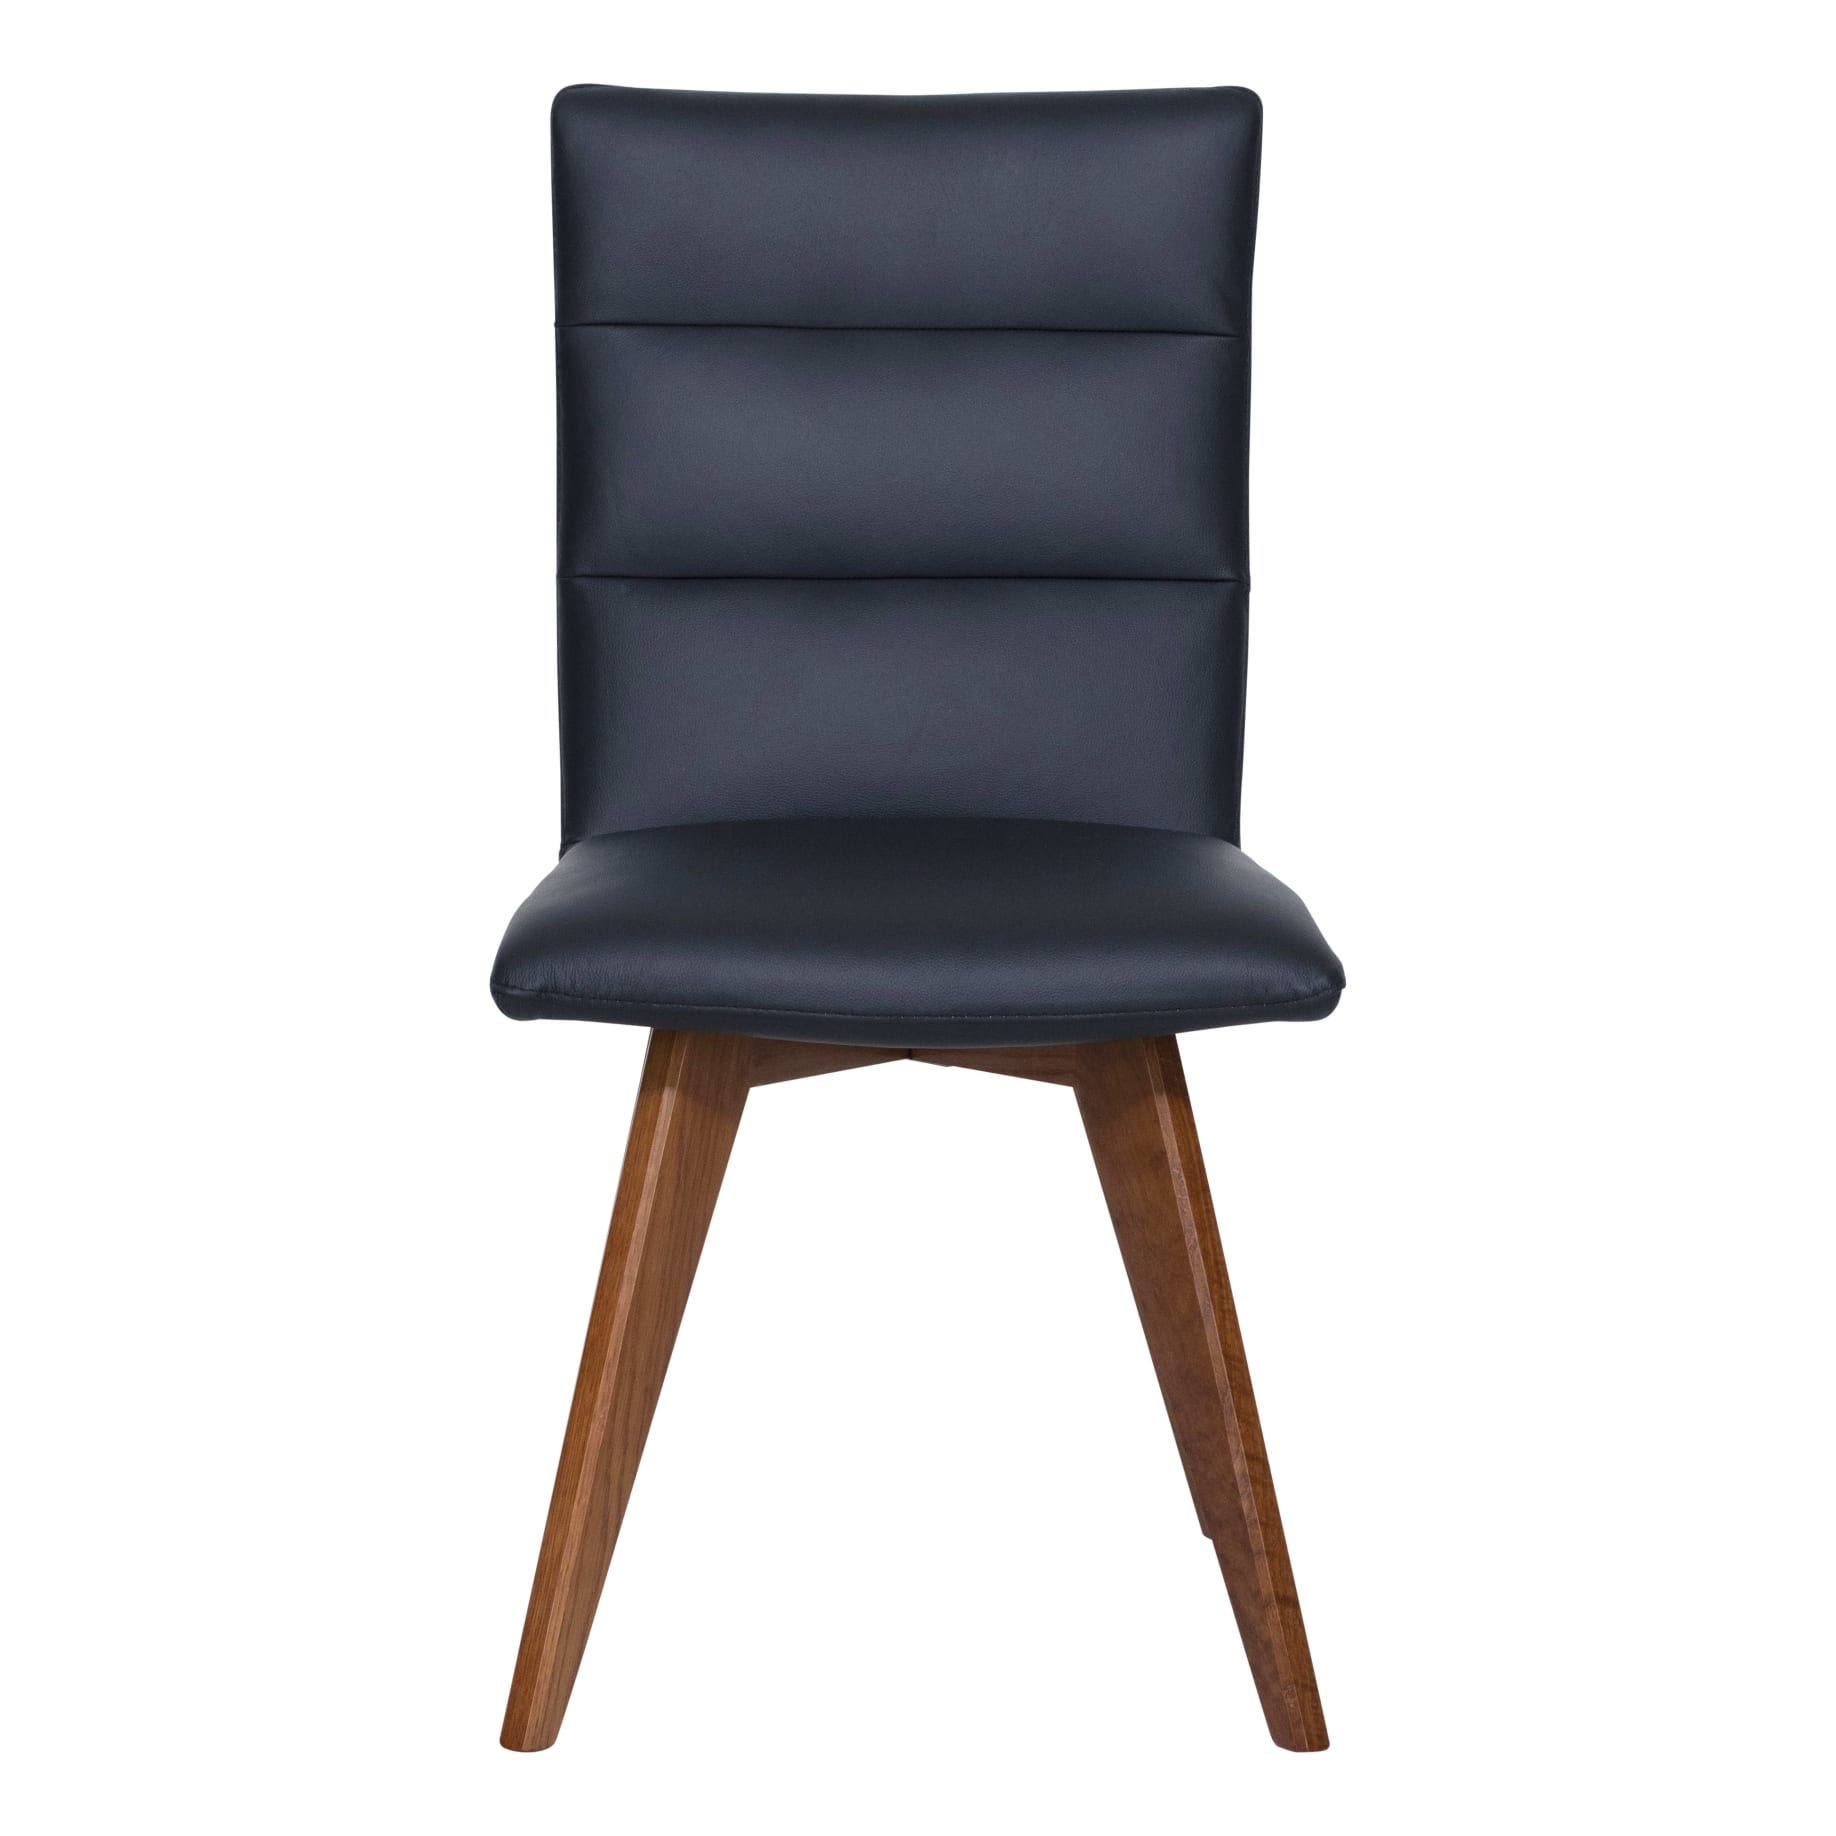 Hudson Dining Chair in Black/ Blackwood Stain